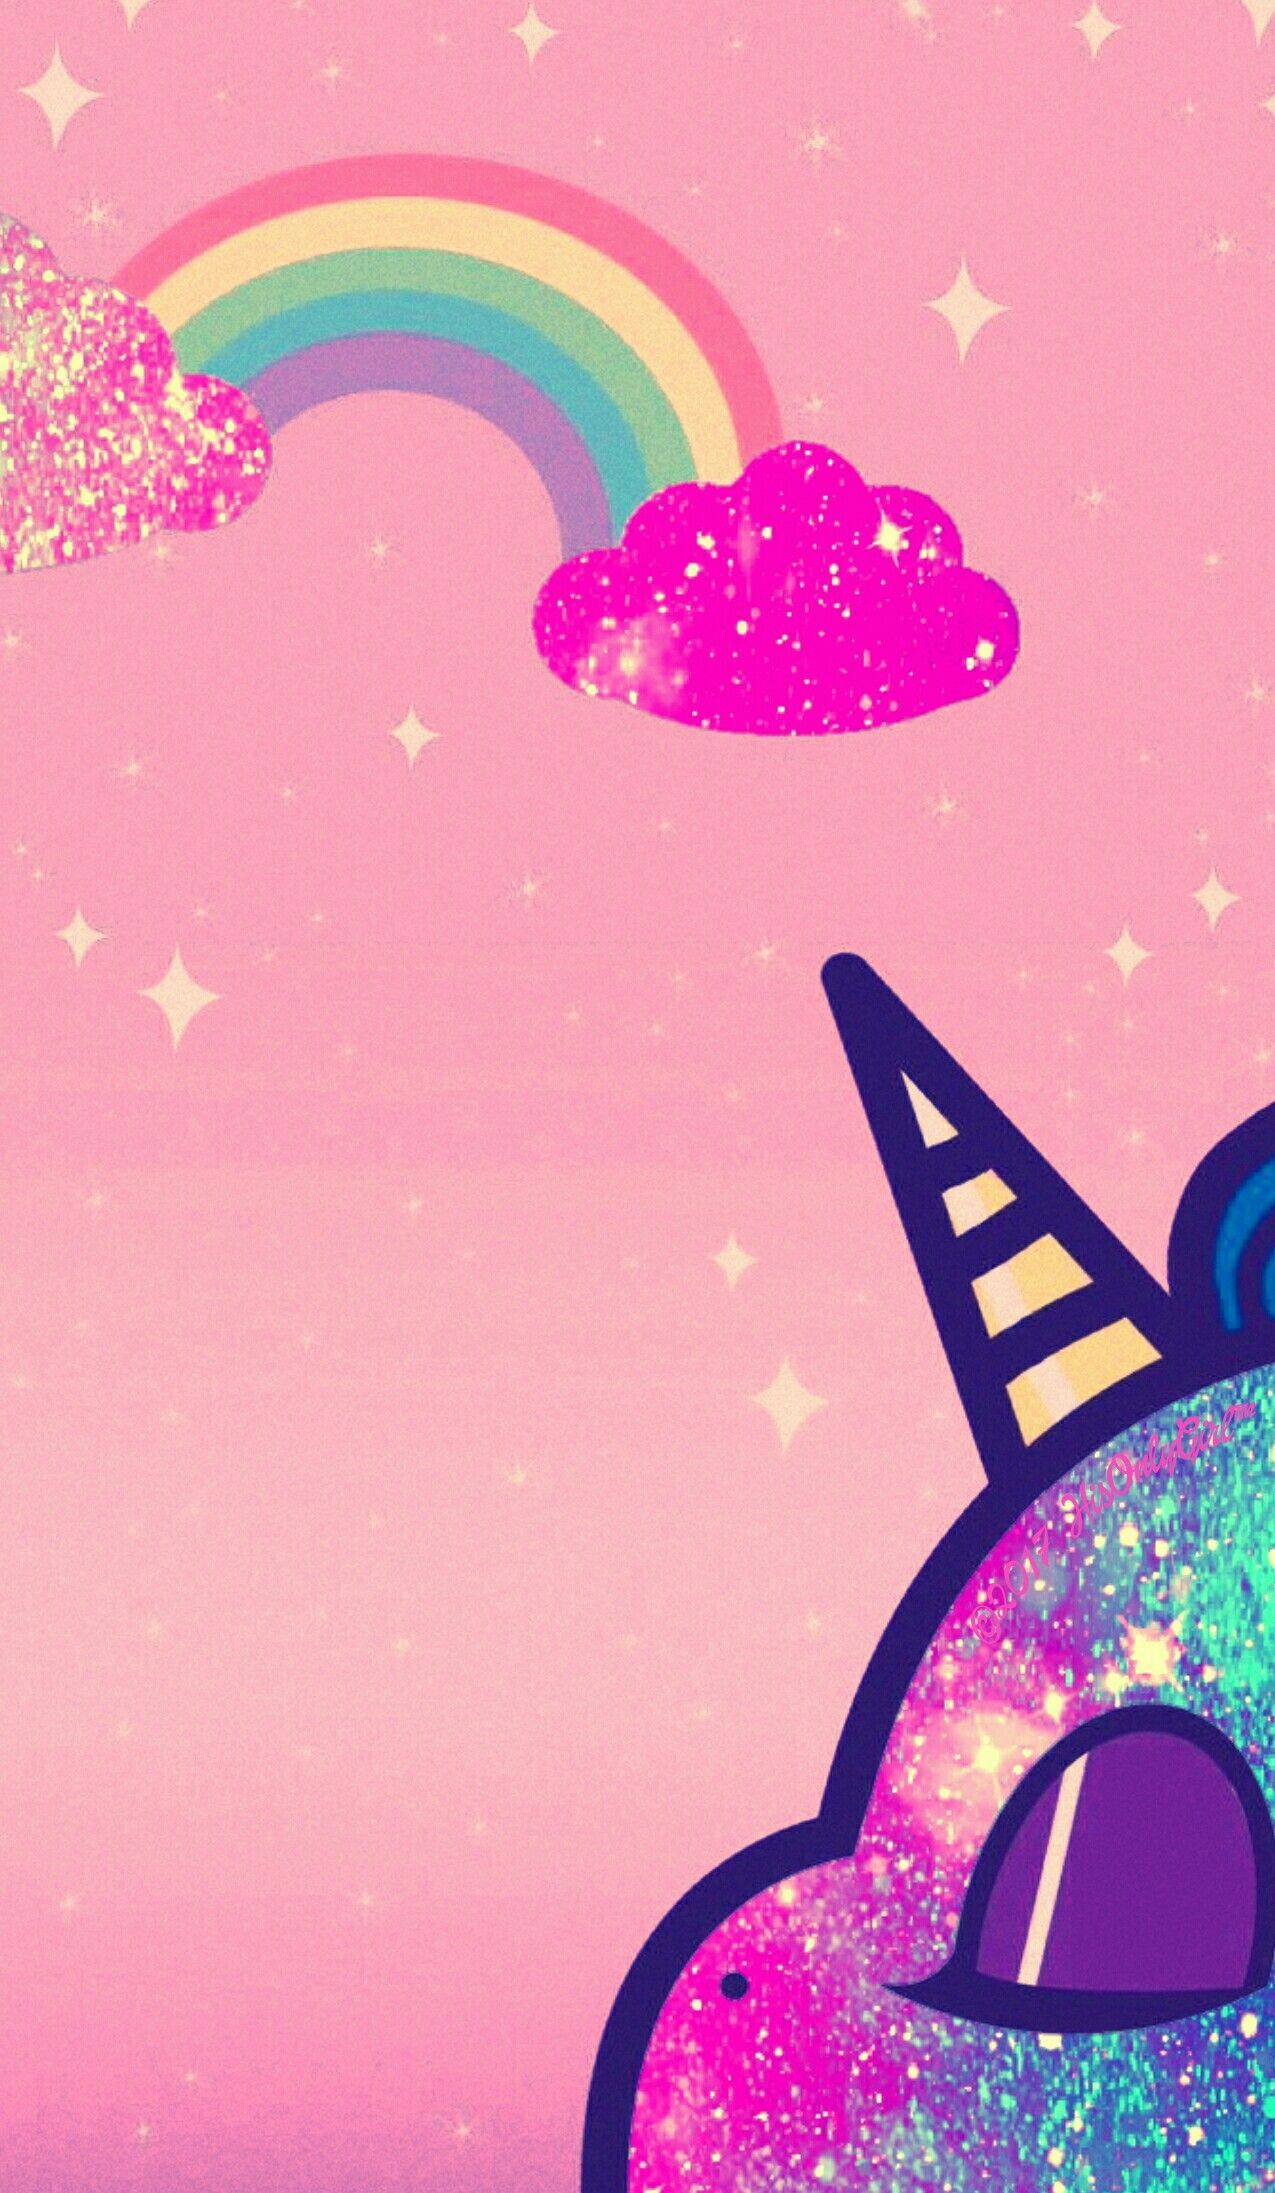 Sweet Unicorn Galaxy IPhone Android Wallpaper I Created For The App CocoPPa. Unicorn Wallpaper Cute, Unicorn Wallpaper, IPhone Wallpaper Unicorn